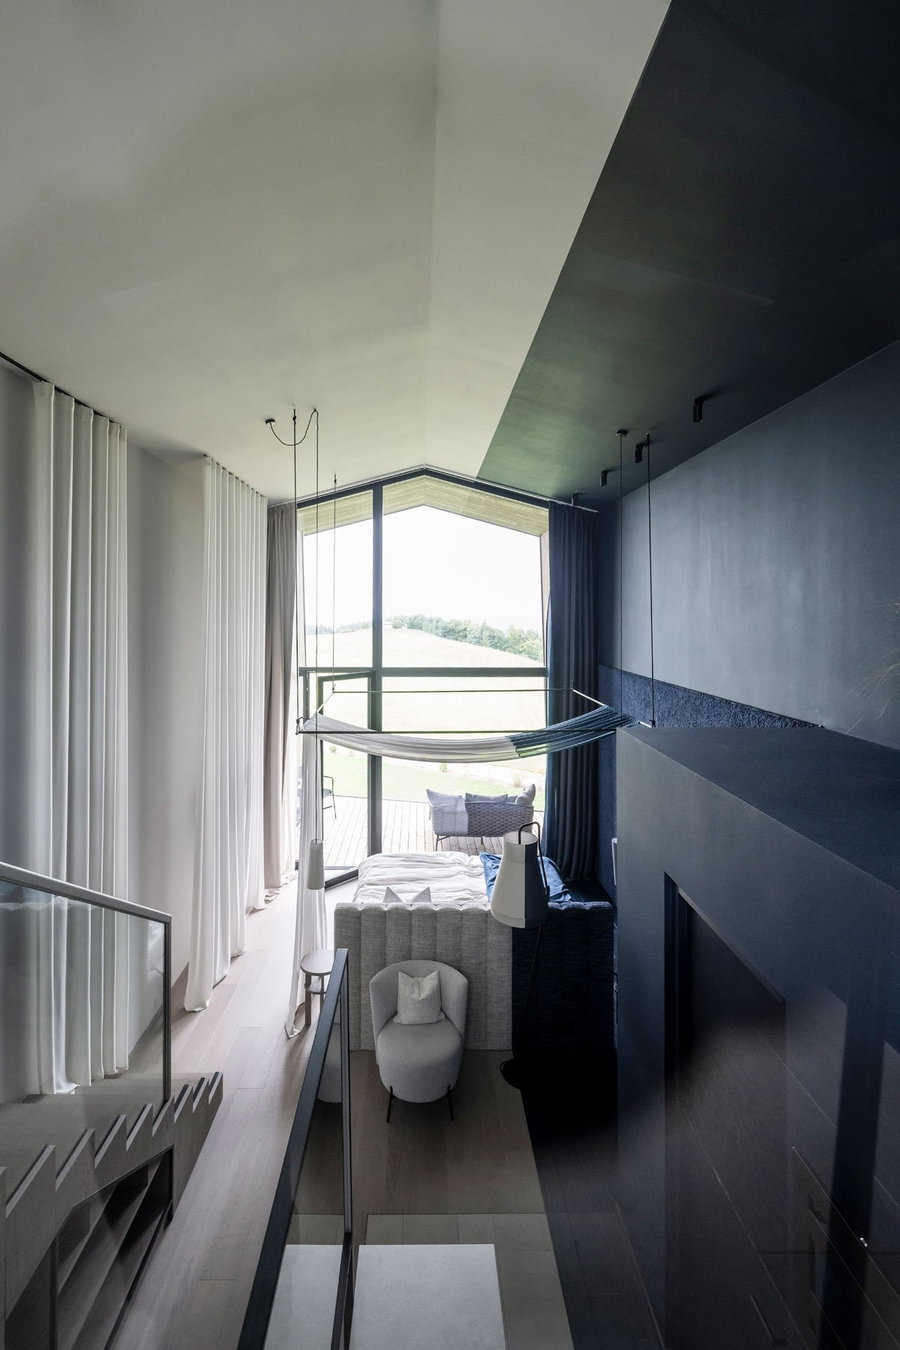 Expansive vertically-oriented Gallery Suite in the noa-designed AEON Hotel.